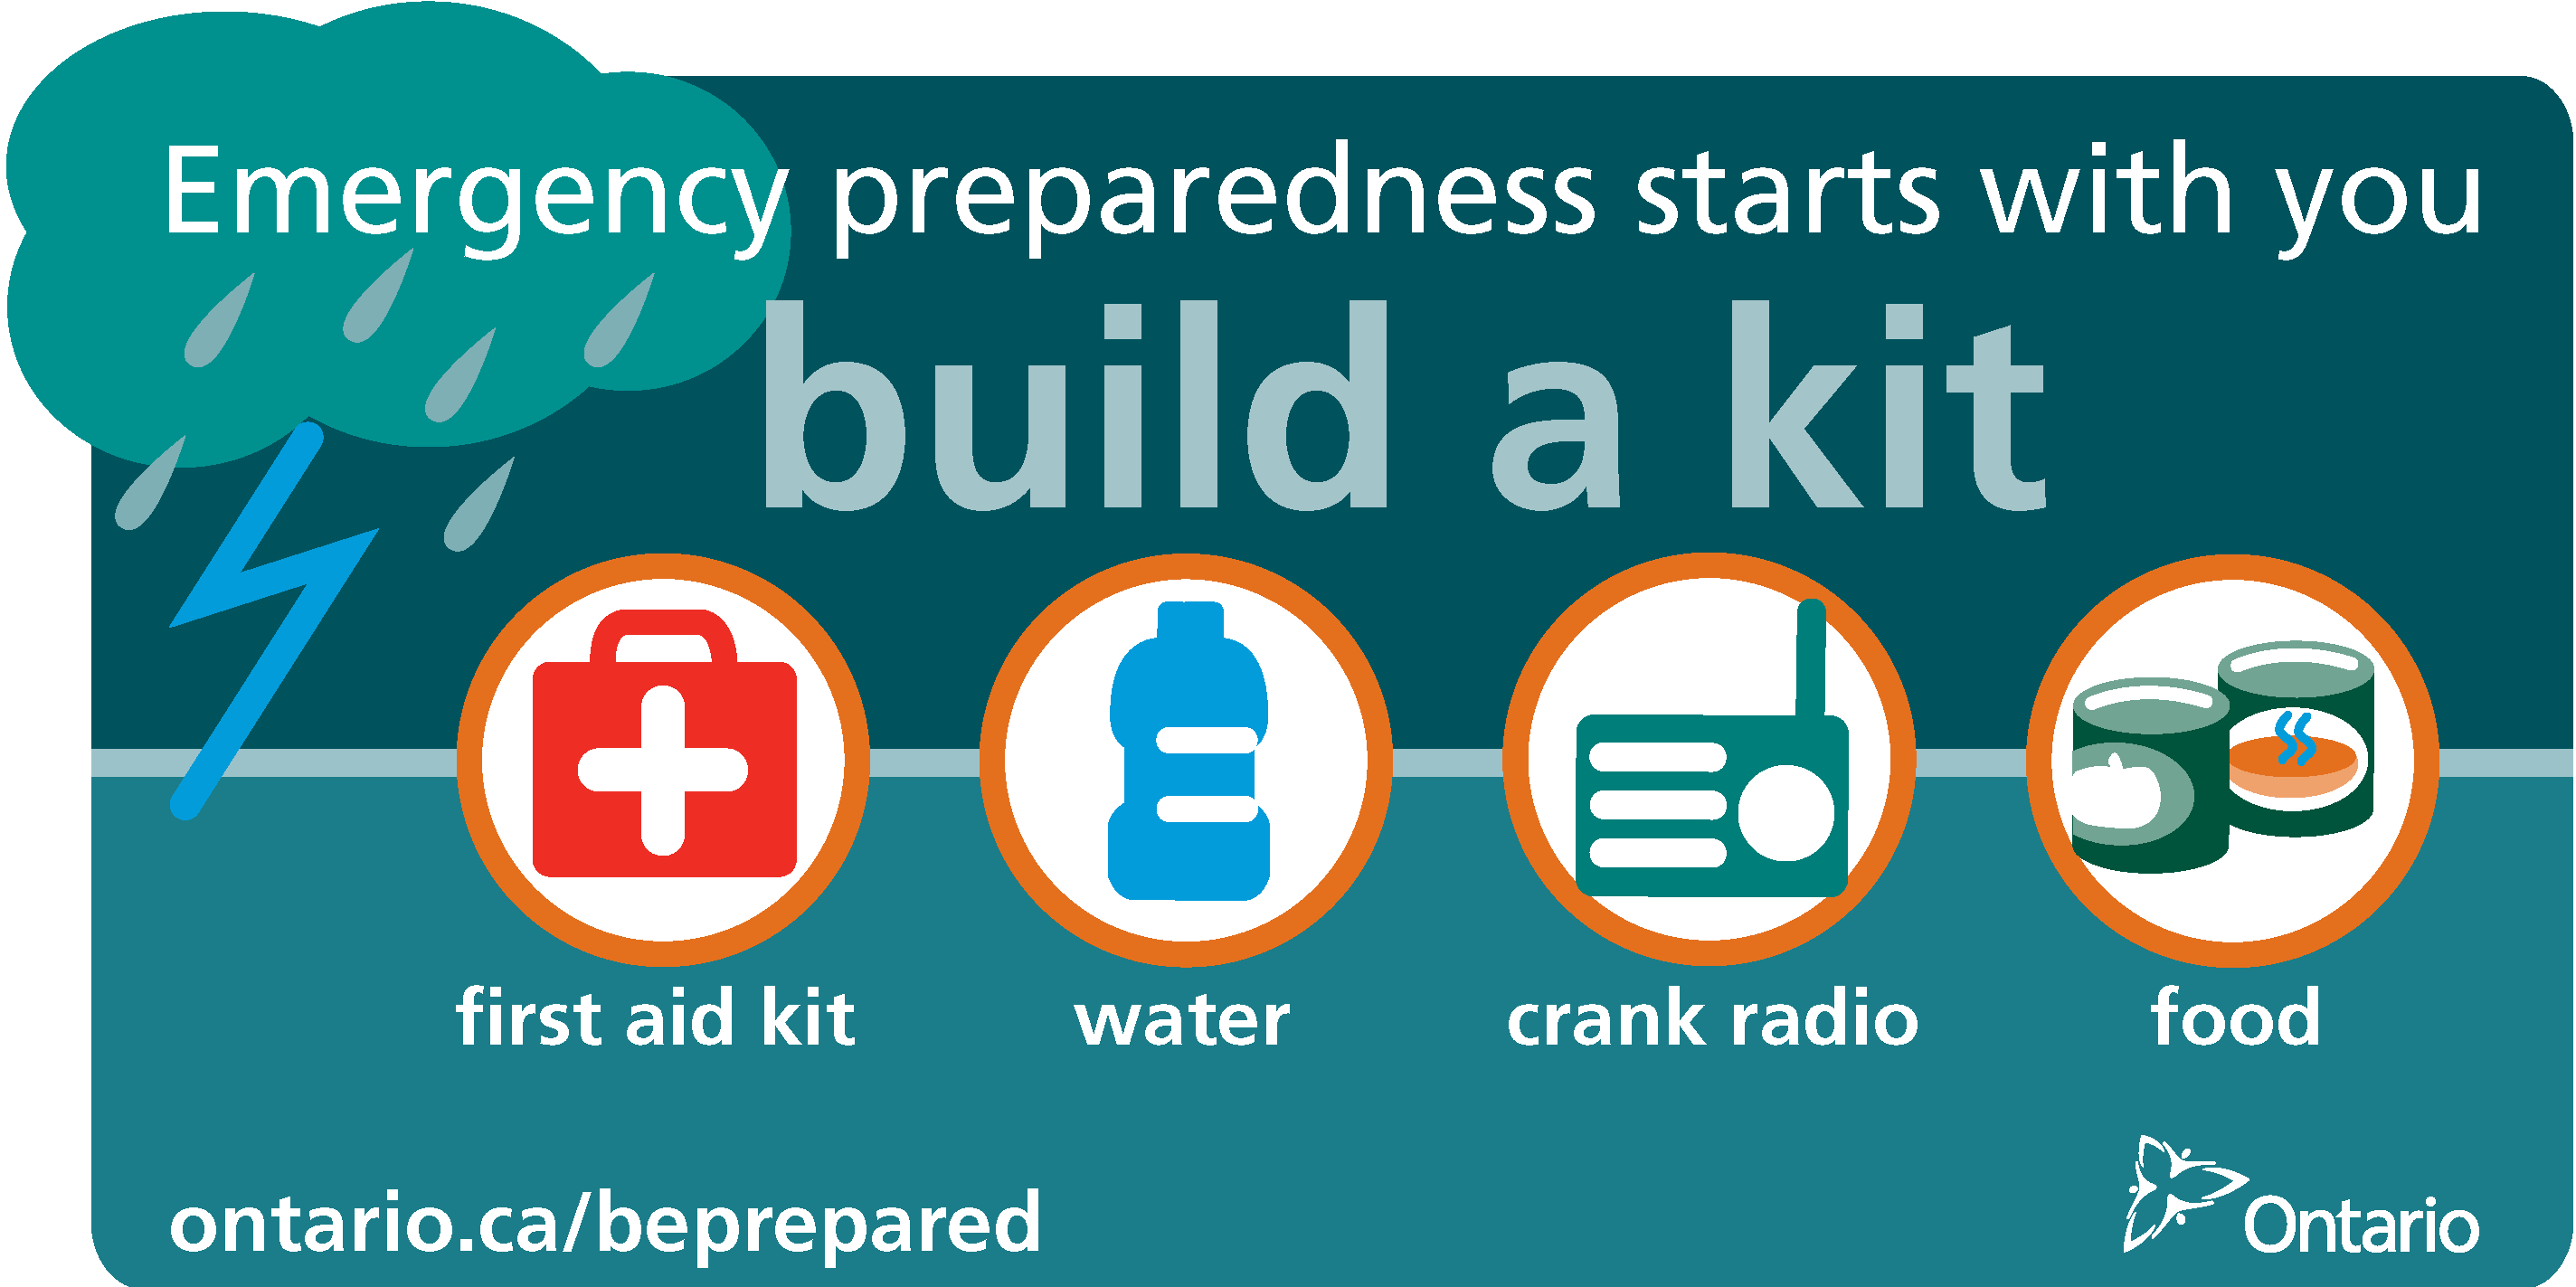 Emergency preparedness starts with you. Build a kit: first aid kit, water, crank radio, food.